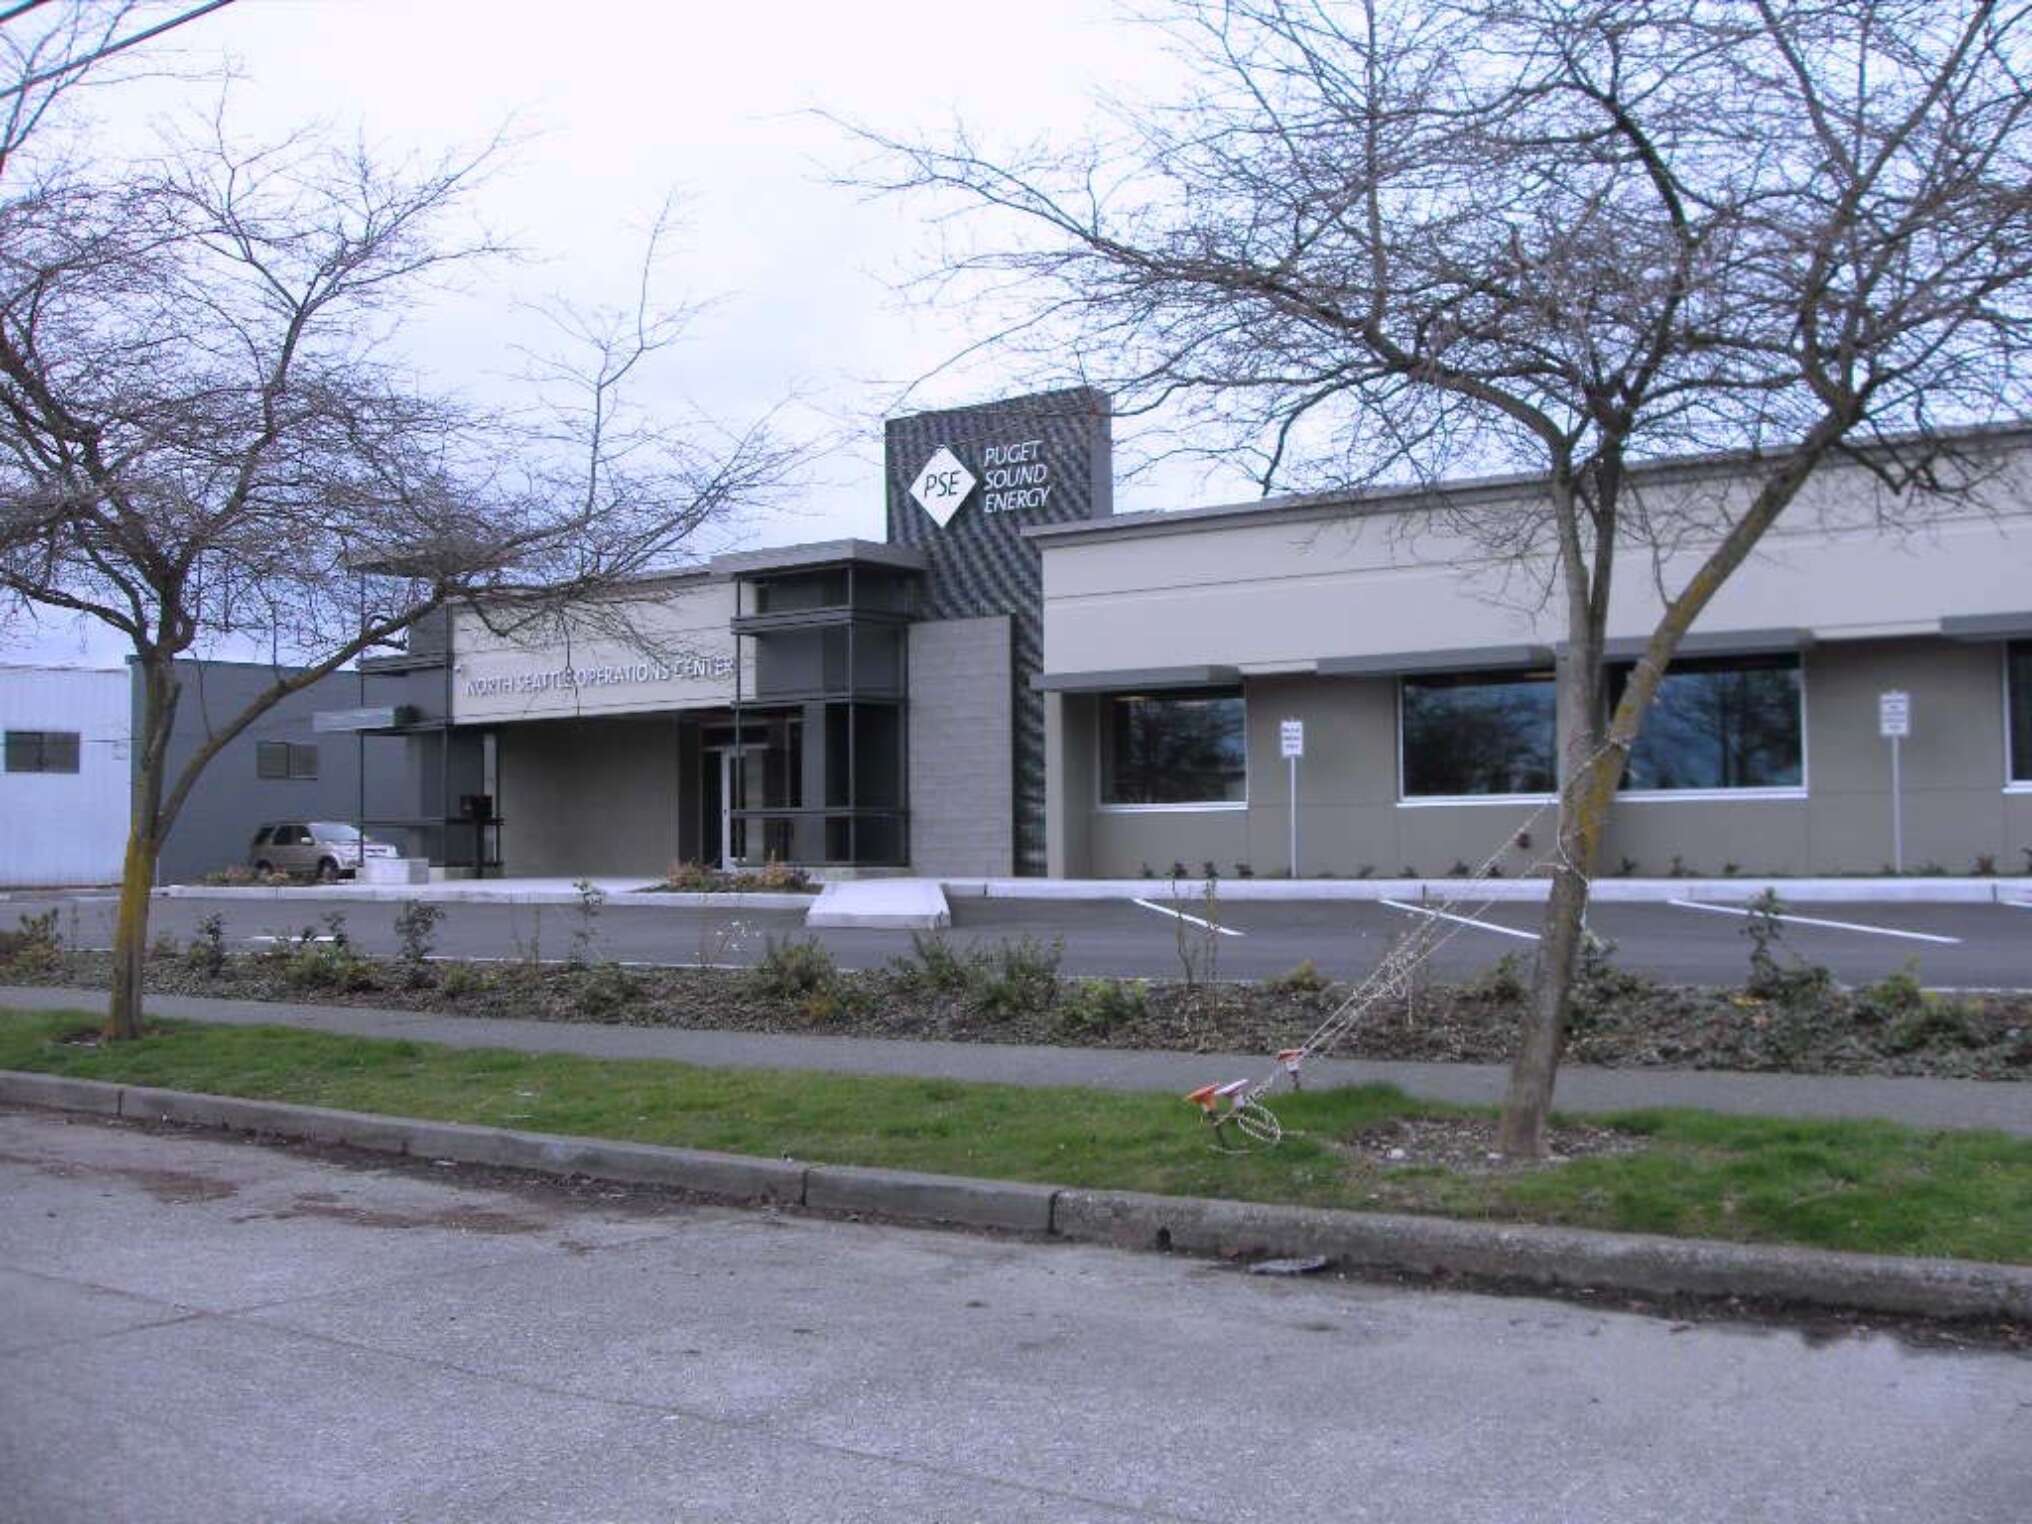 Puget Sound Energy North Seattle Operations Center